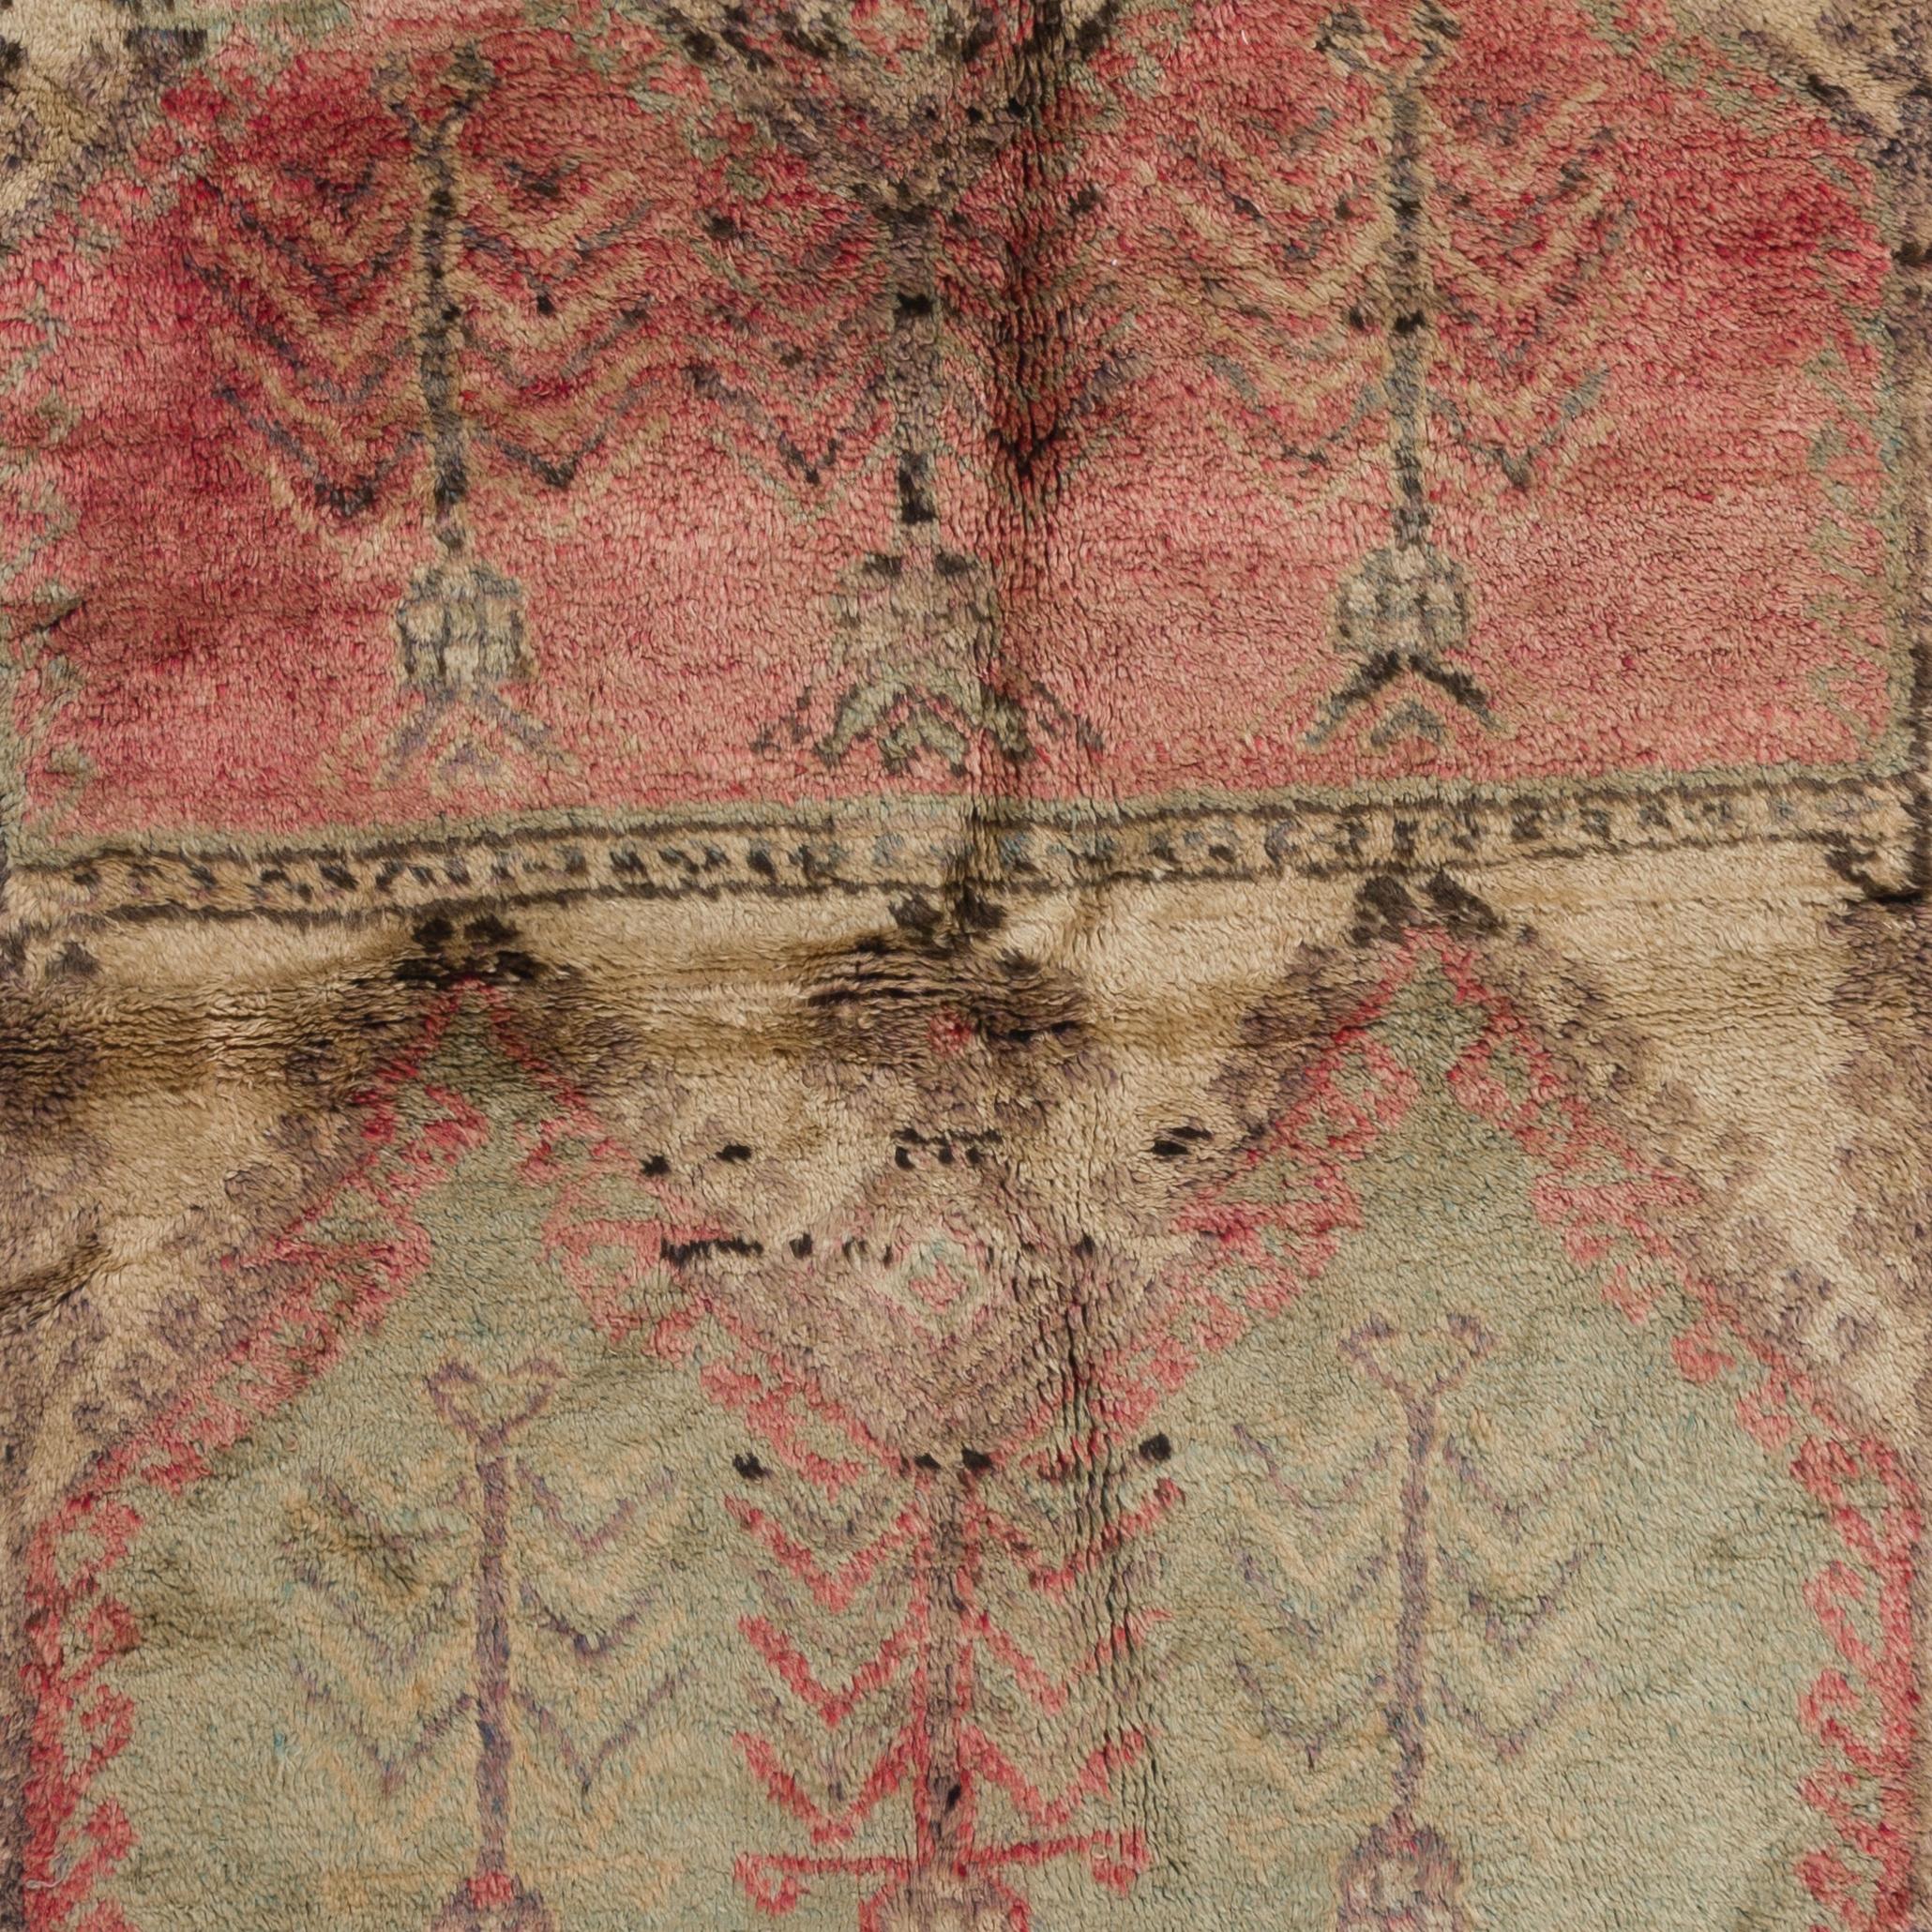 Tribal 4x6 Ft Antique Central Anatolian Village Rug in Soft Plant Dyed Colors, Ca 1910 For Sale